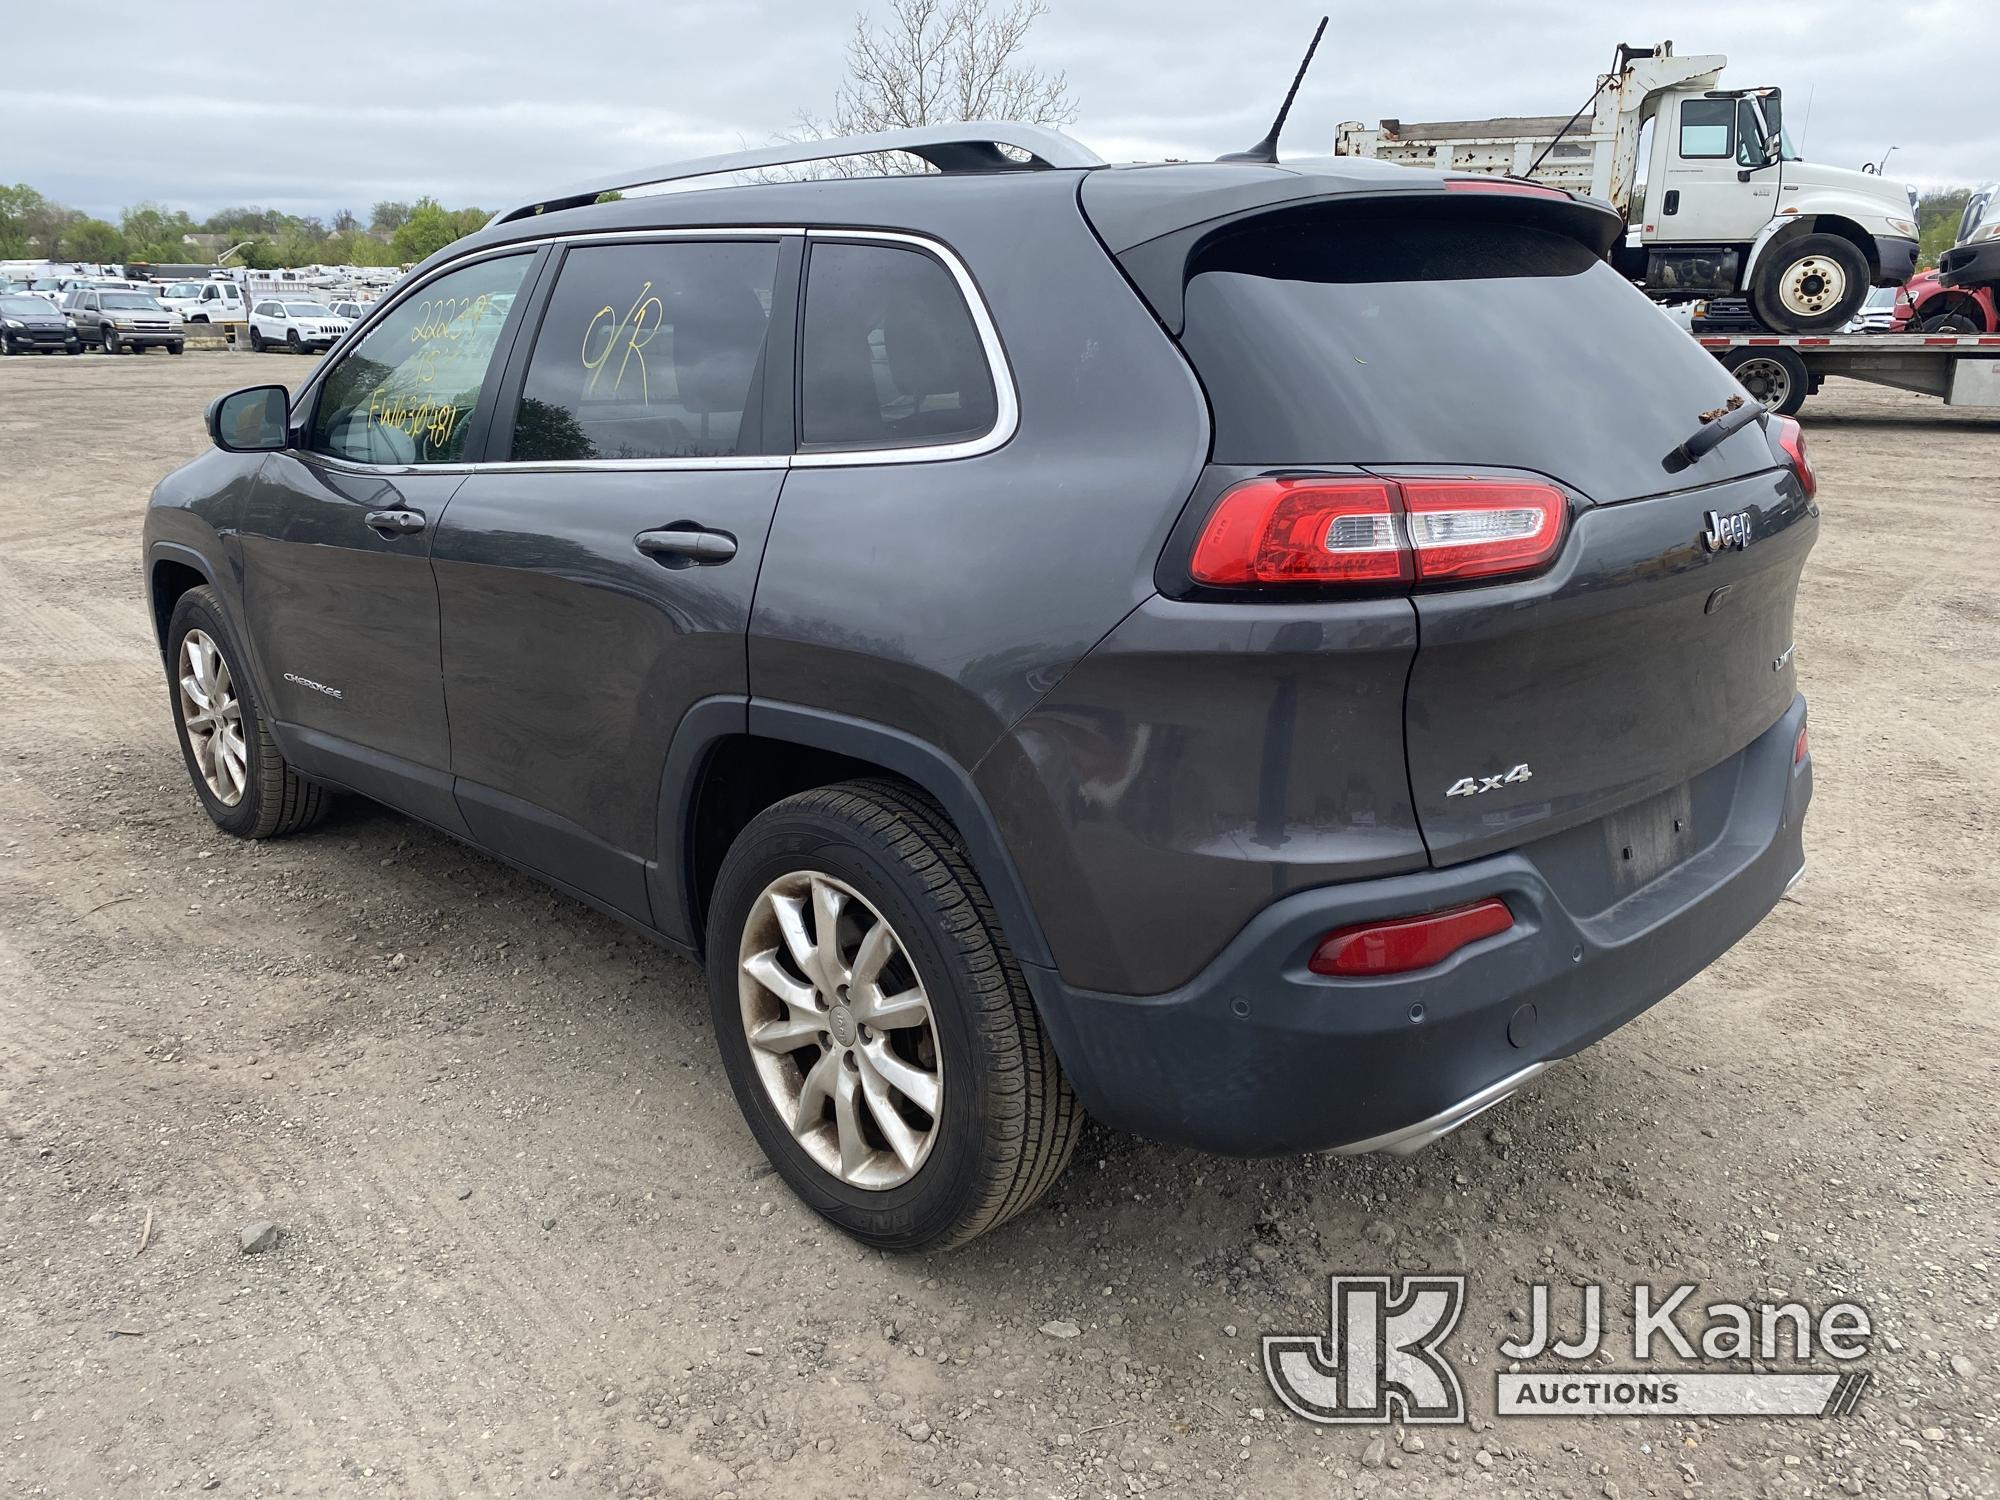 (Plymouth Meeting, PA) 2015 Jeep Cherokee 4x4 4-Door Sport Utility Vehicle Runs & Moves, Trans Issue